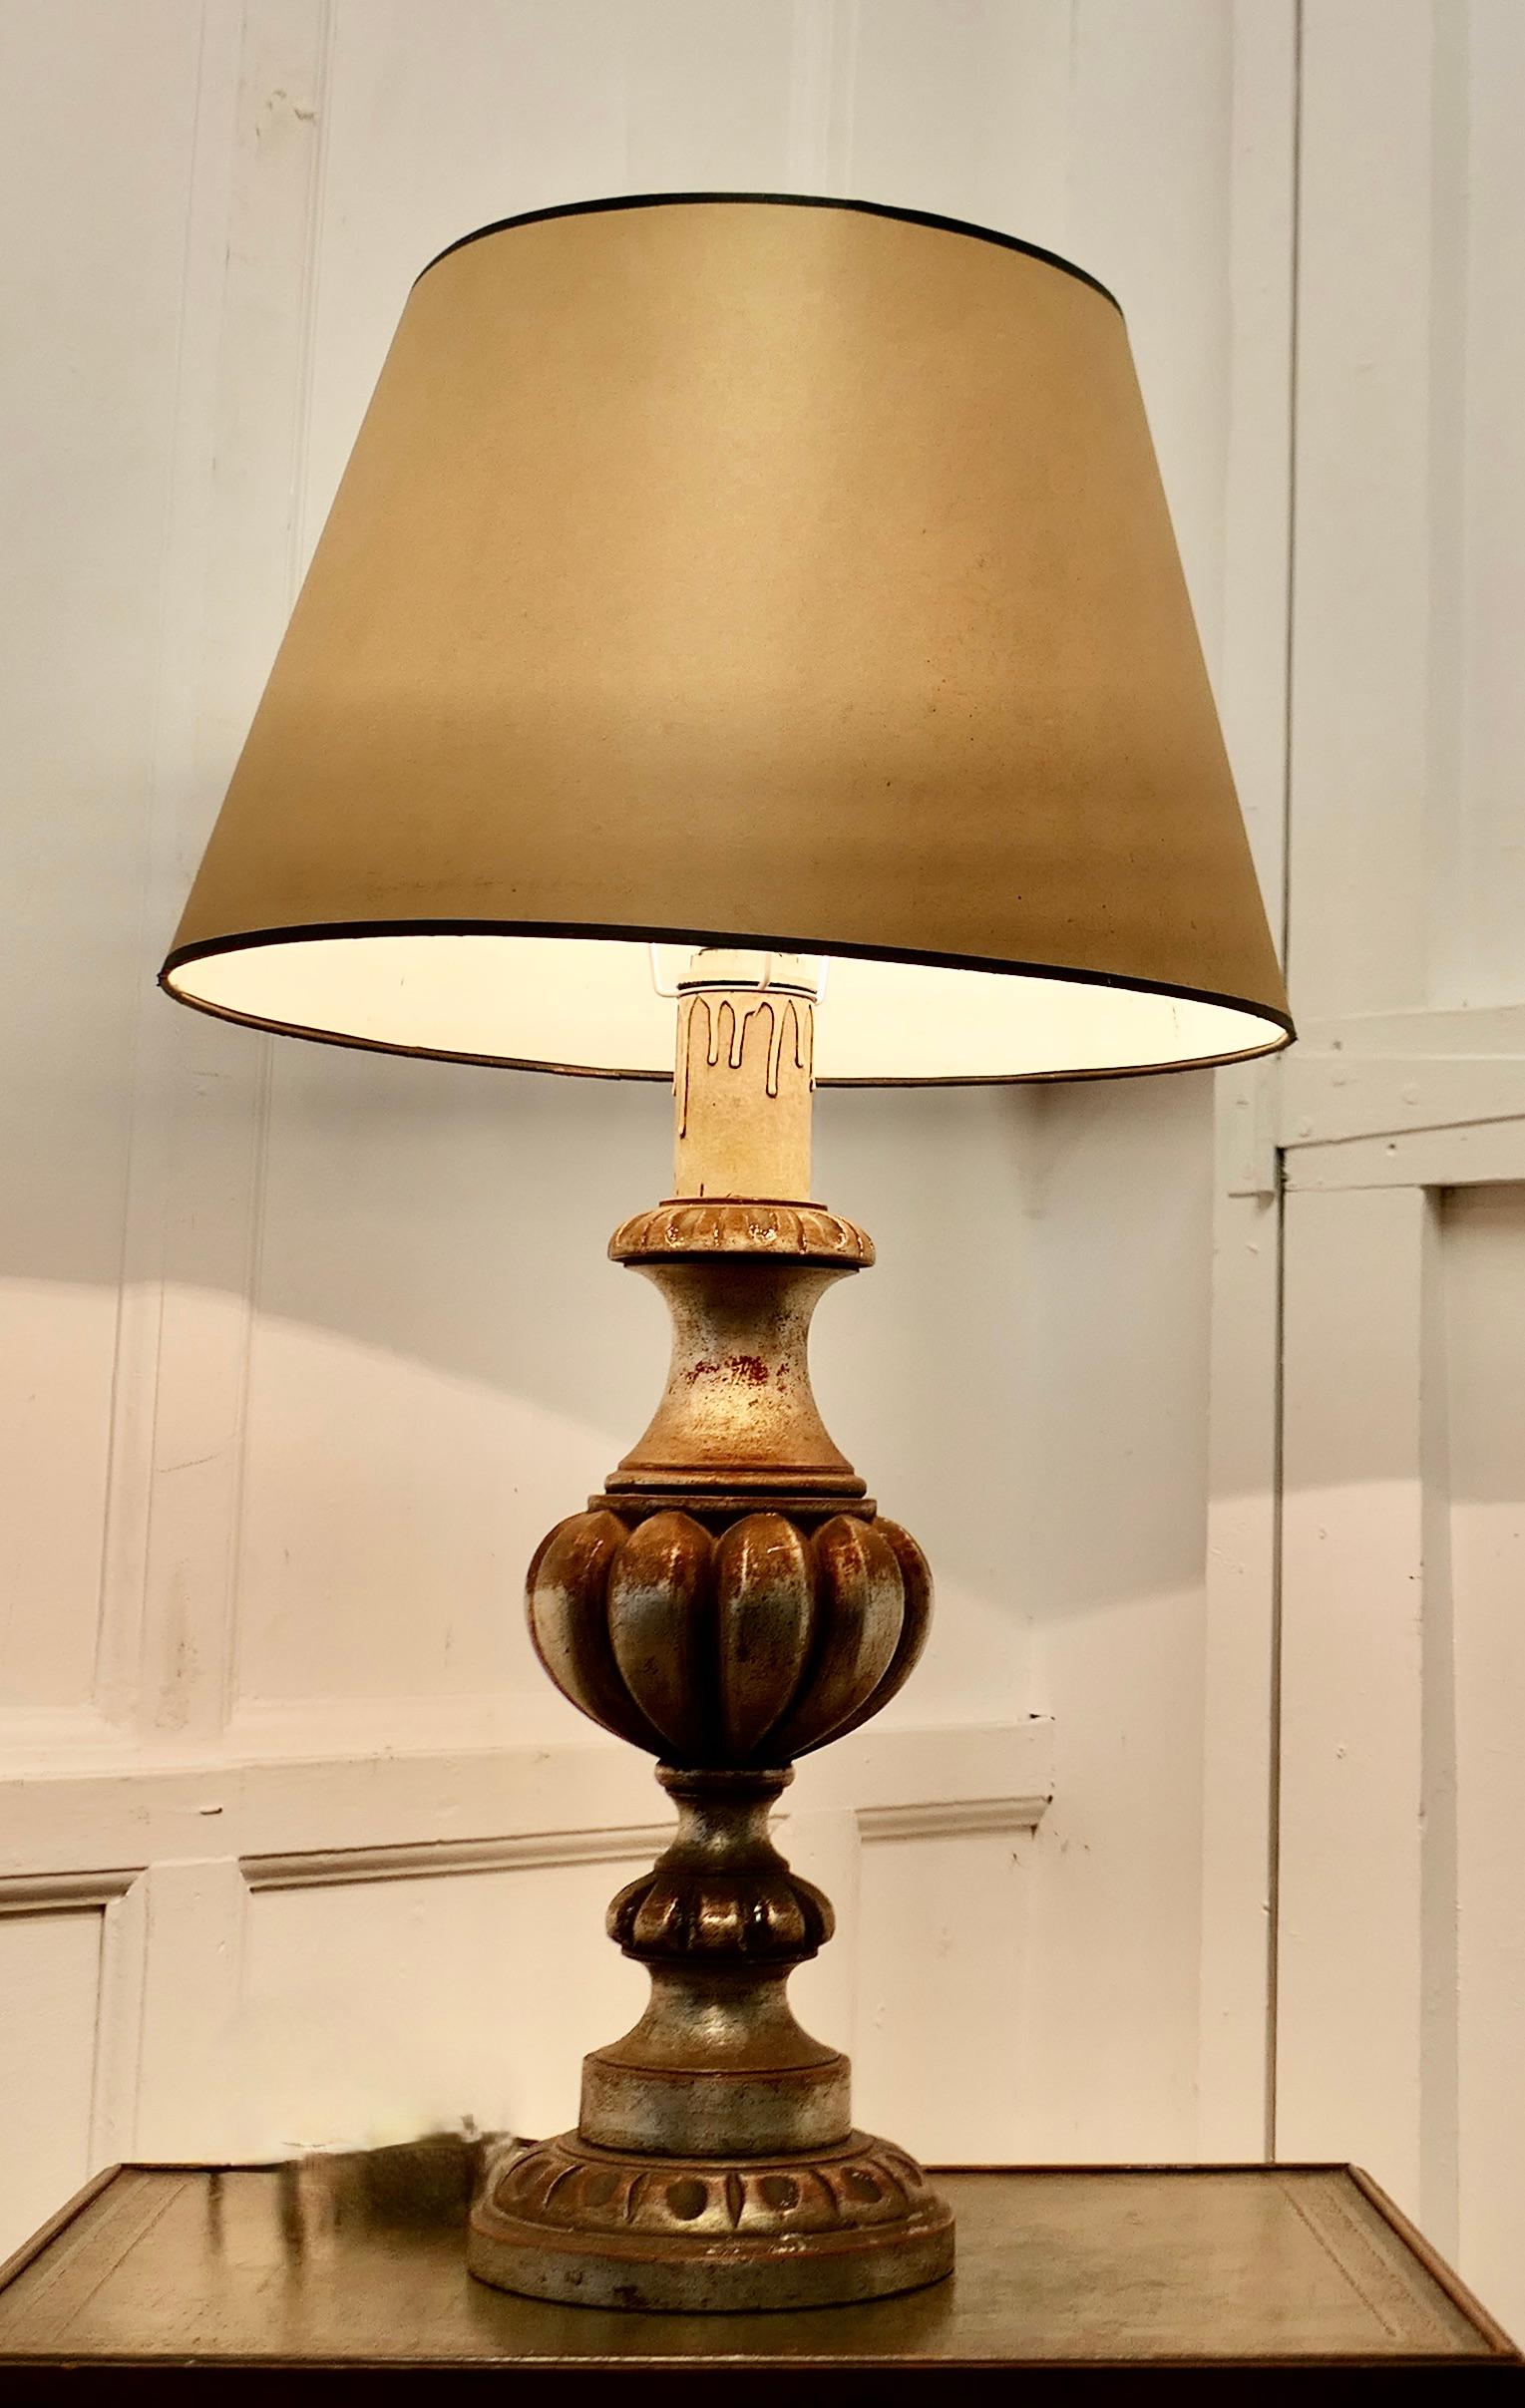 Edwardian Large Carved Wooden Table Lamp  This is a great statement piece, it has a large  For Sale